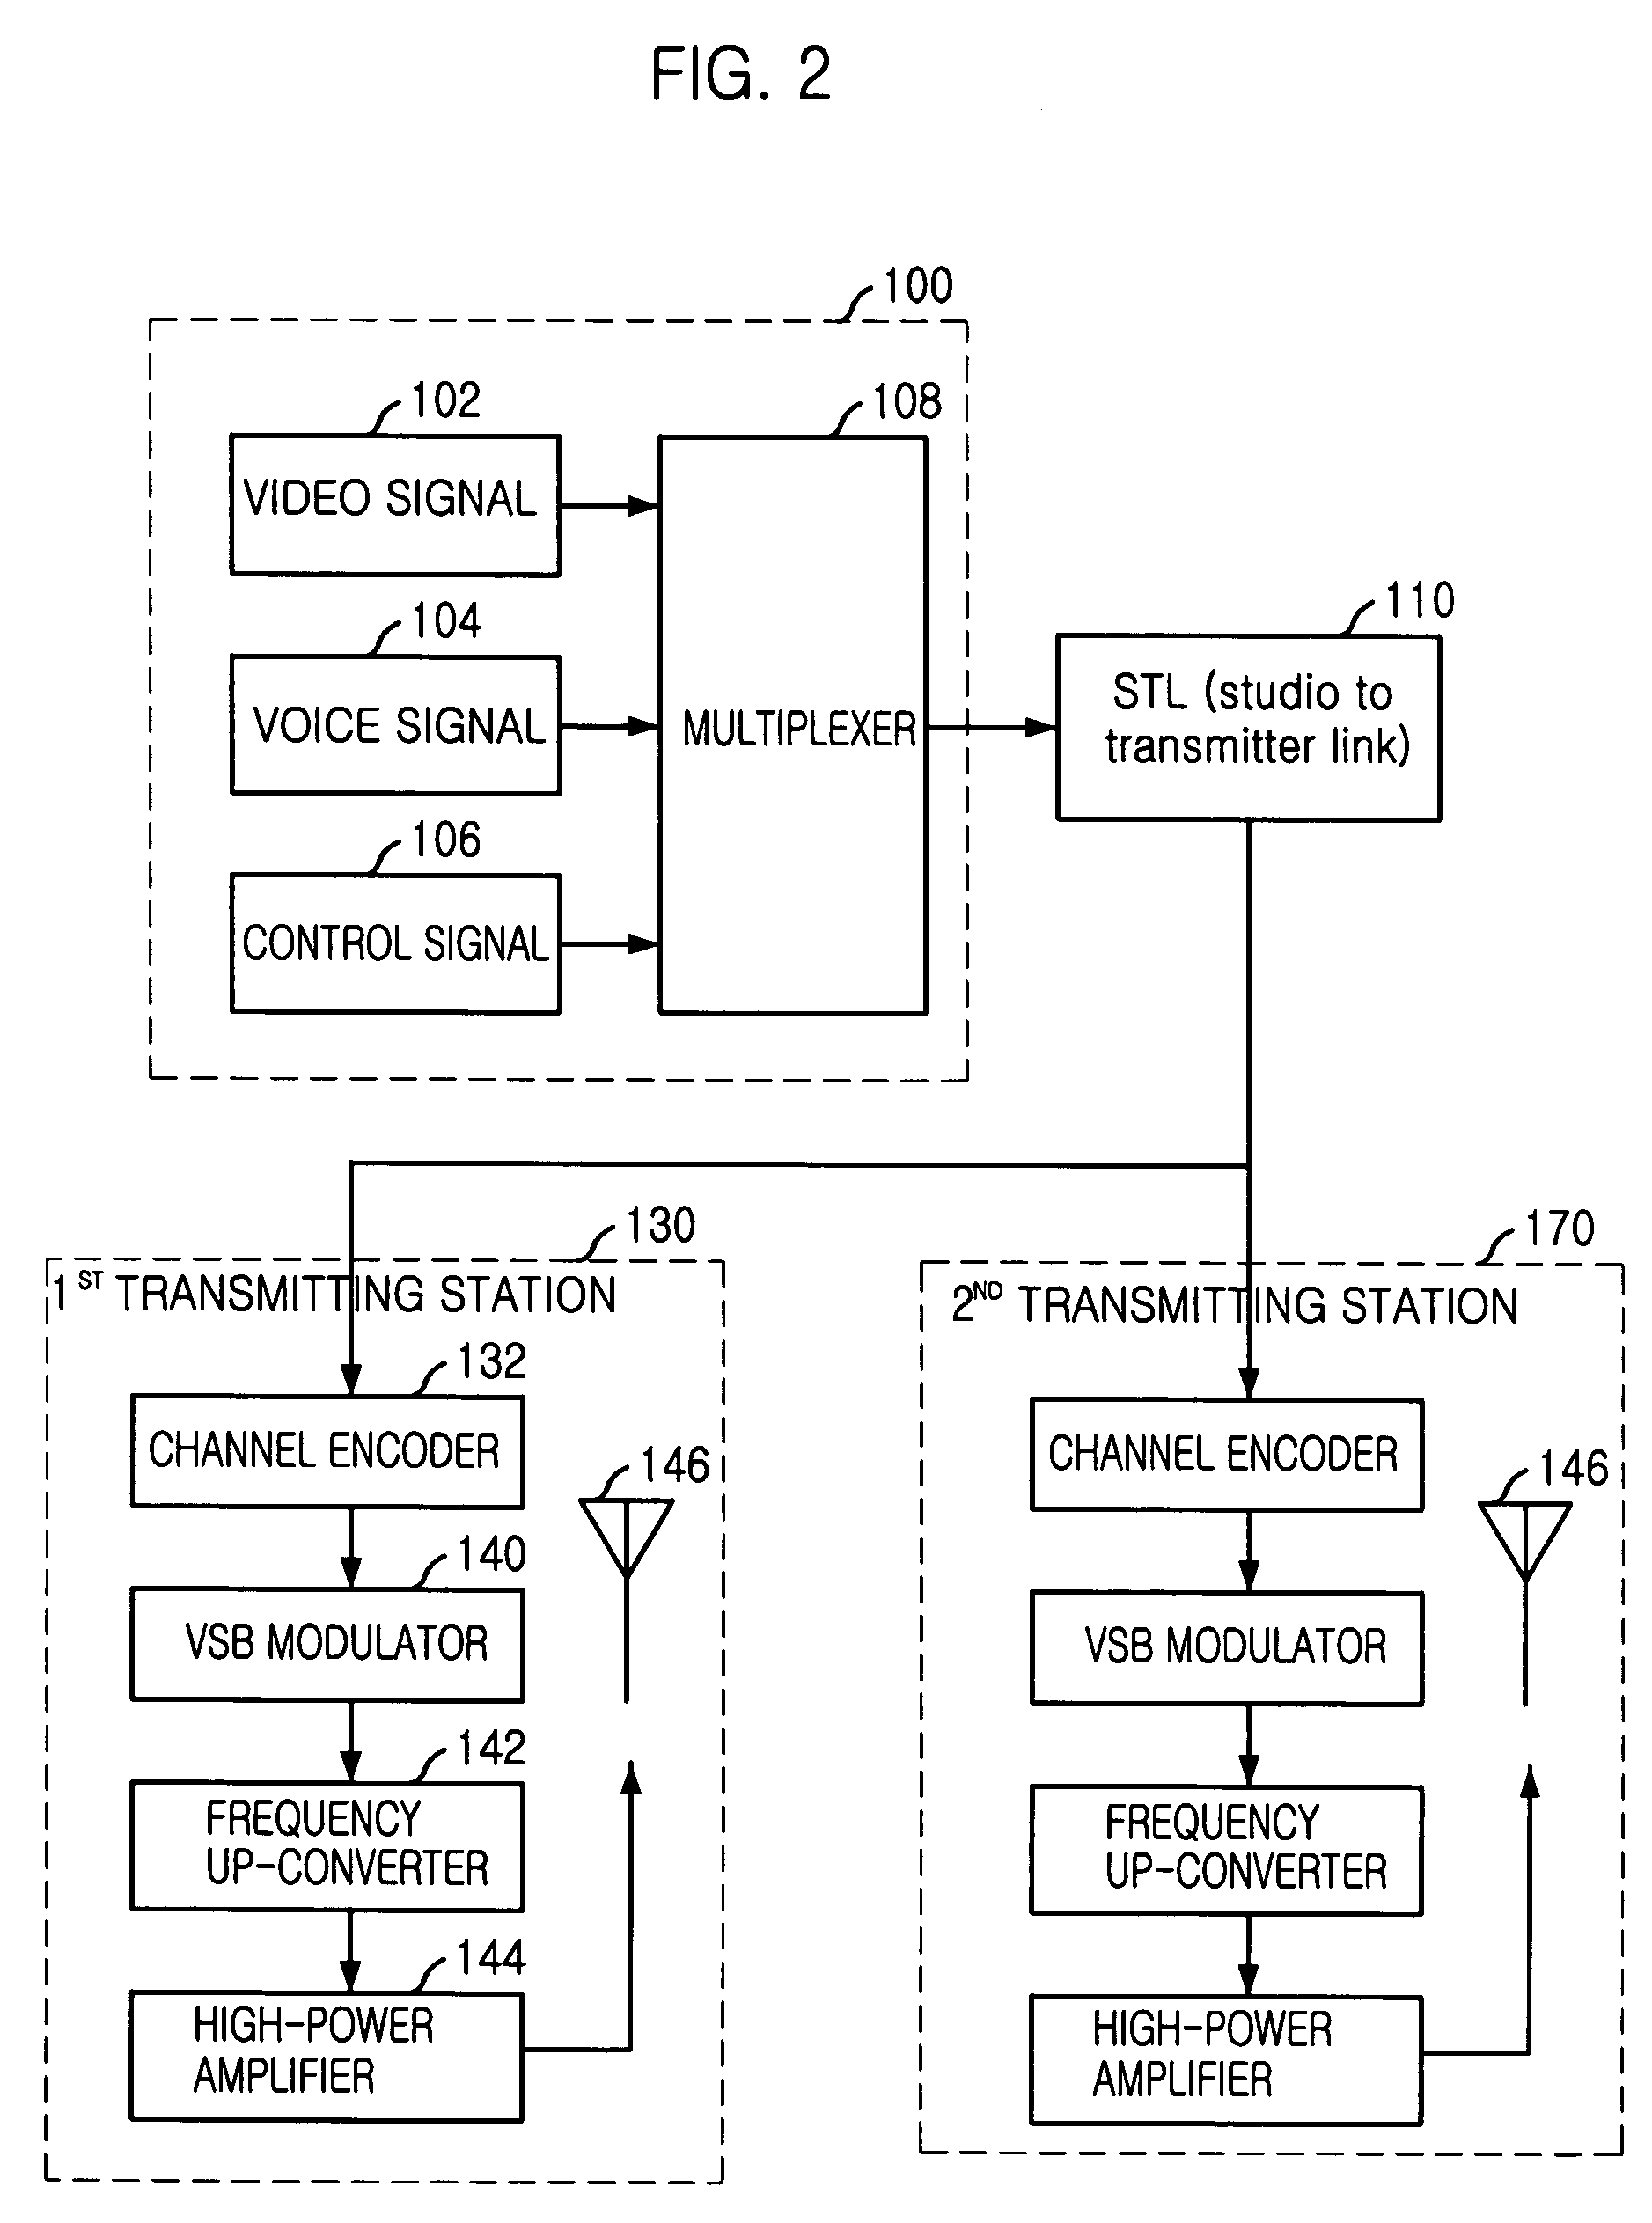 System and method for providing terrestrial digital broadcasting service using single frequency network